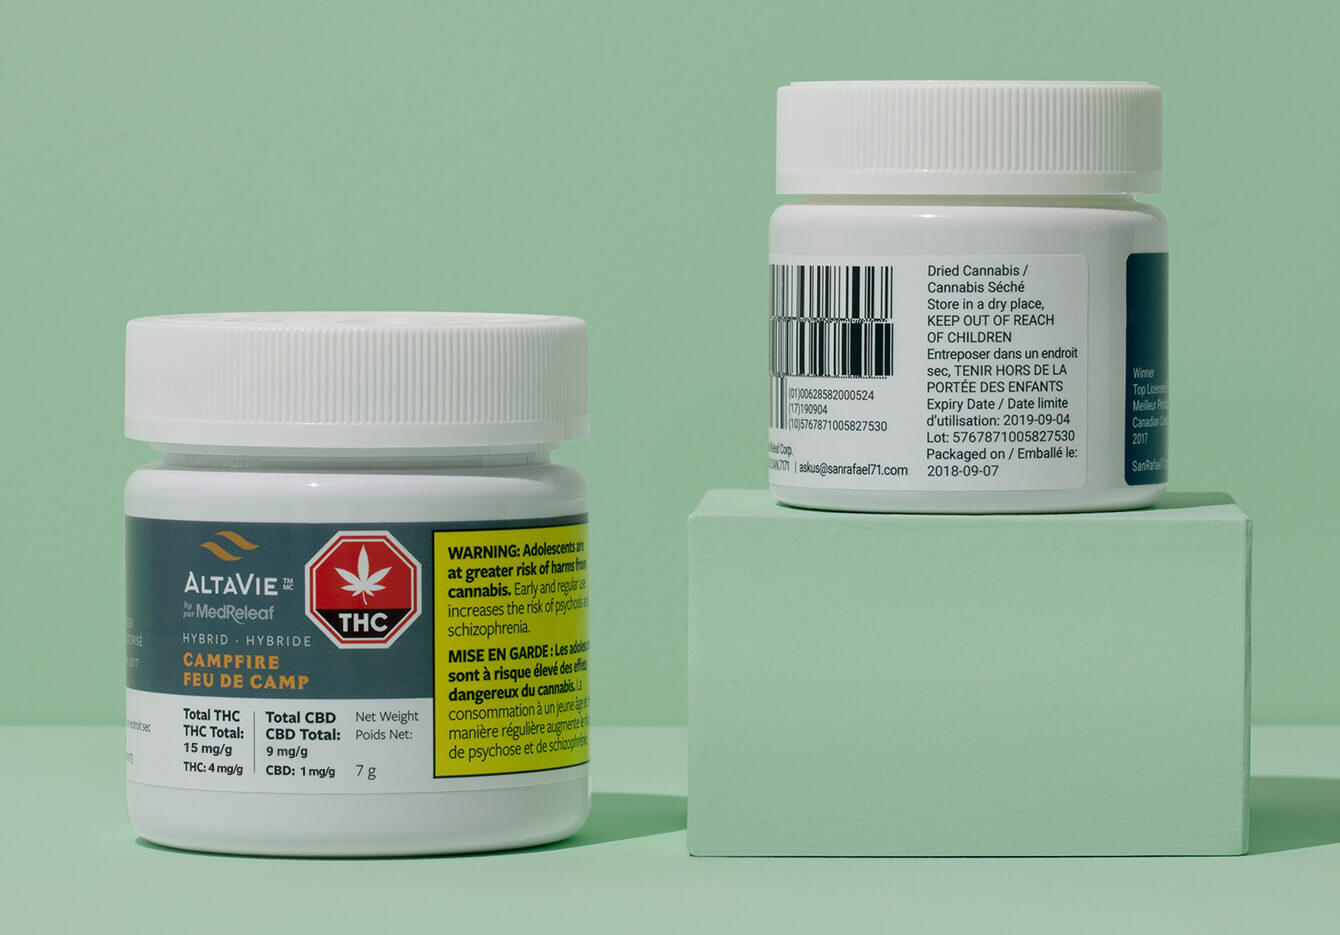 Up Close Cannabis Packaging